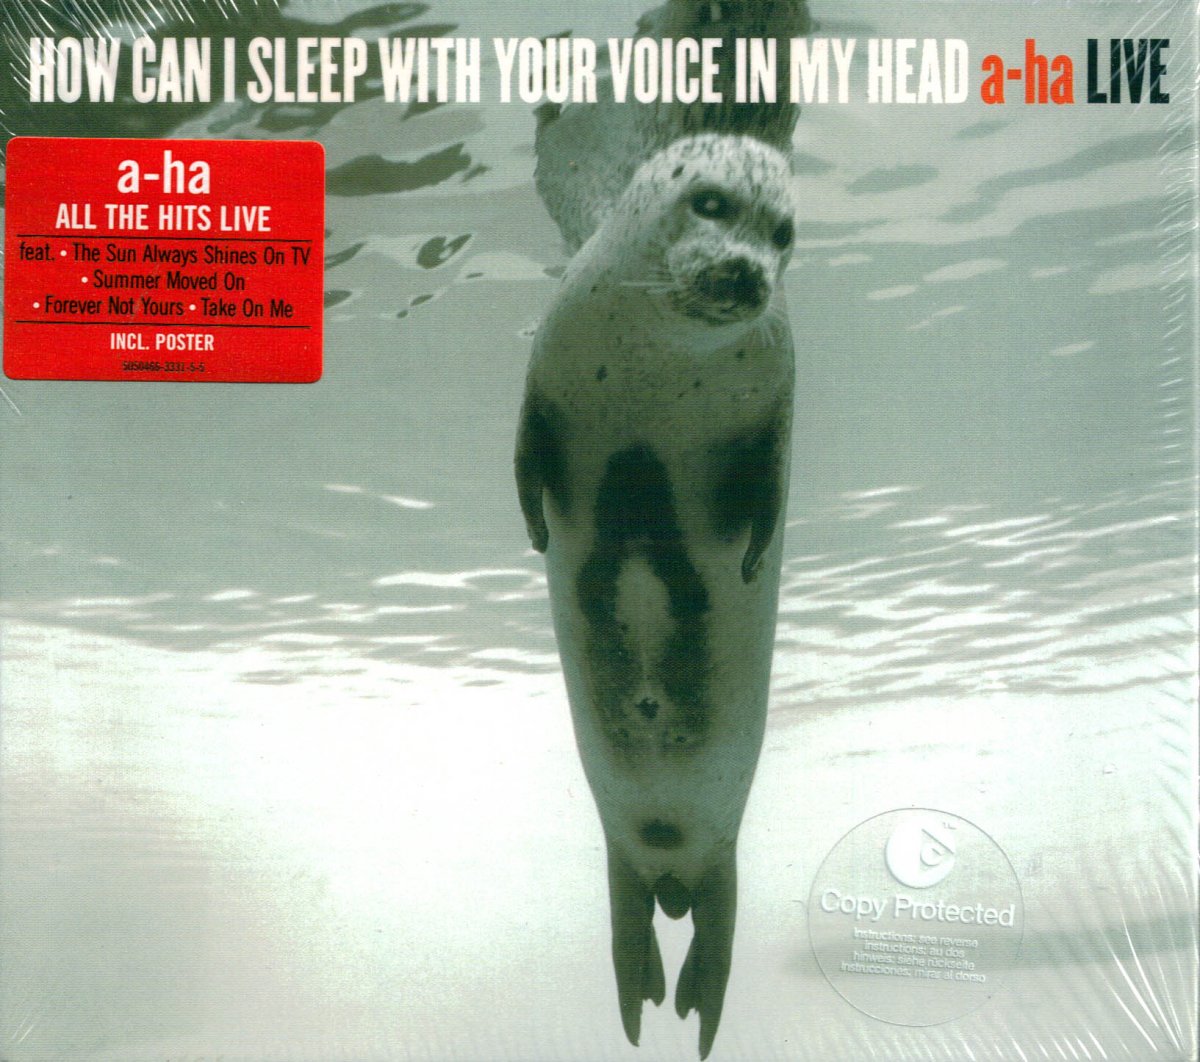 How Can I Sleep With Your Voice In My Head - All Products - Sound Station